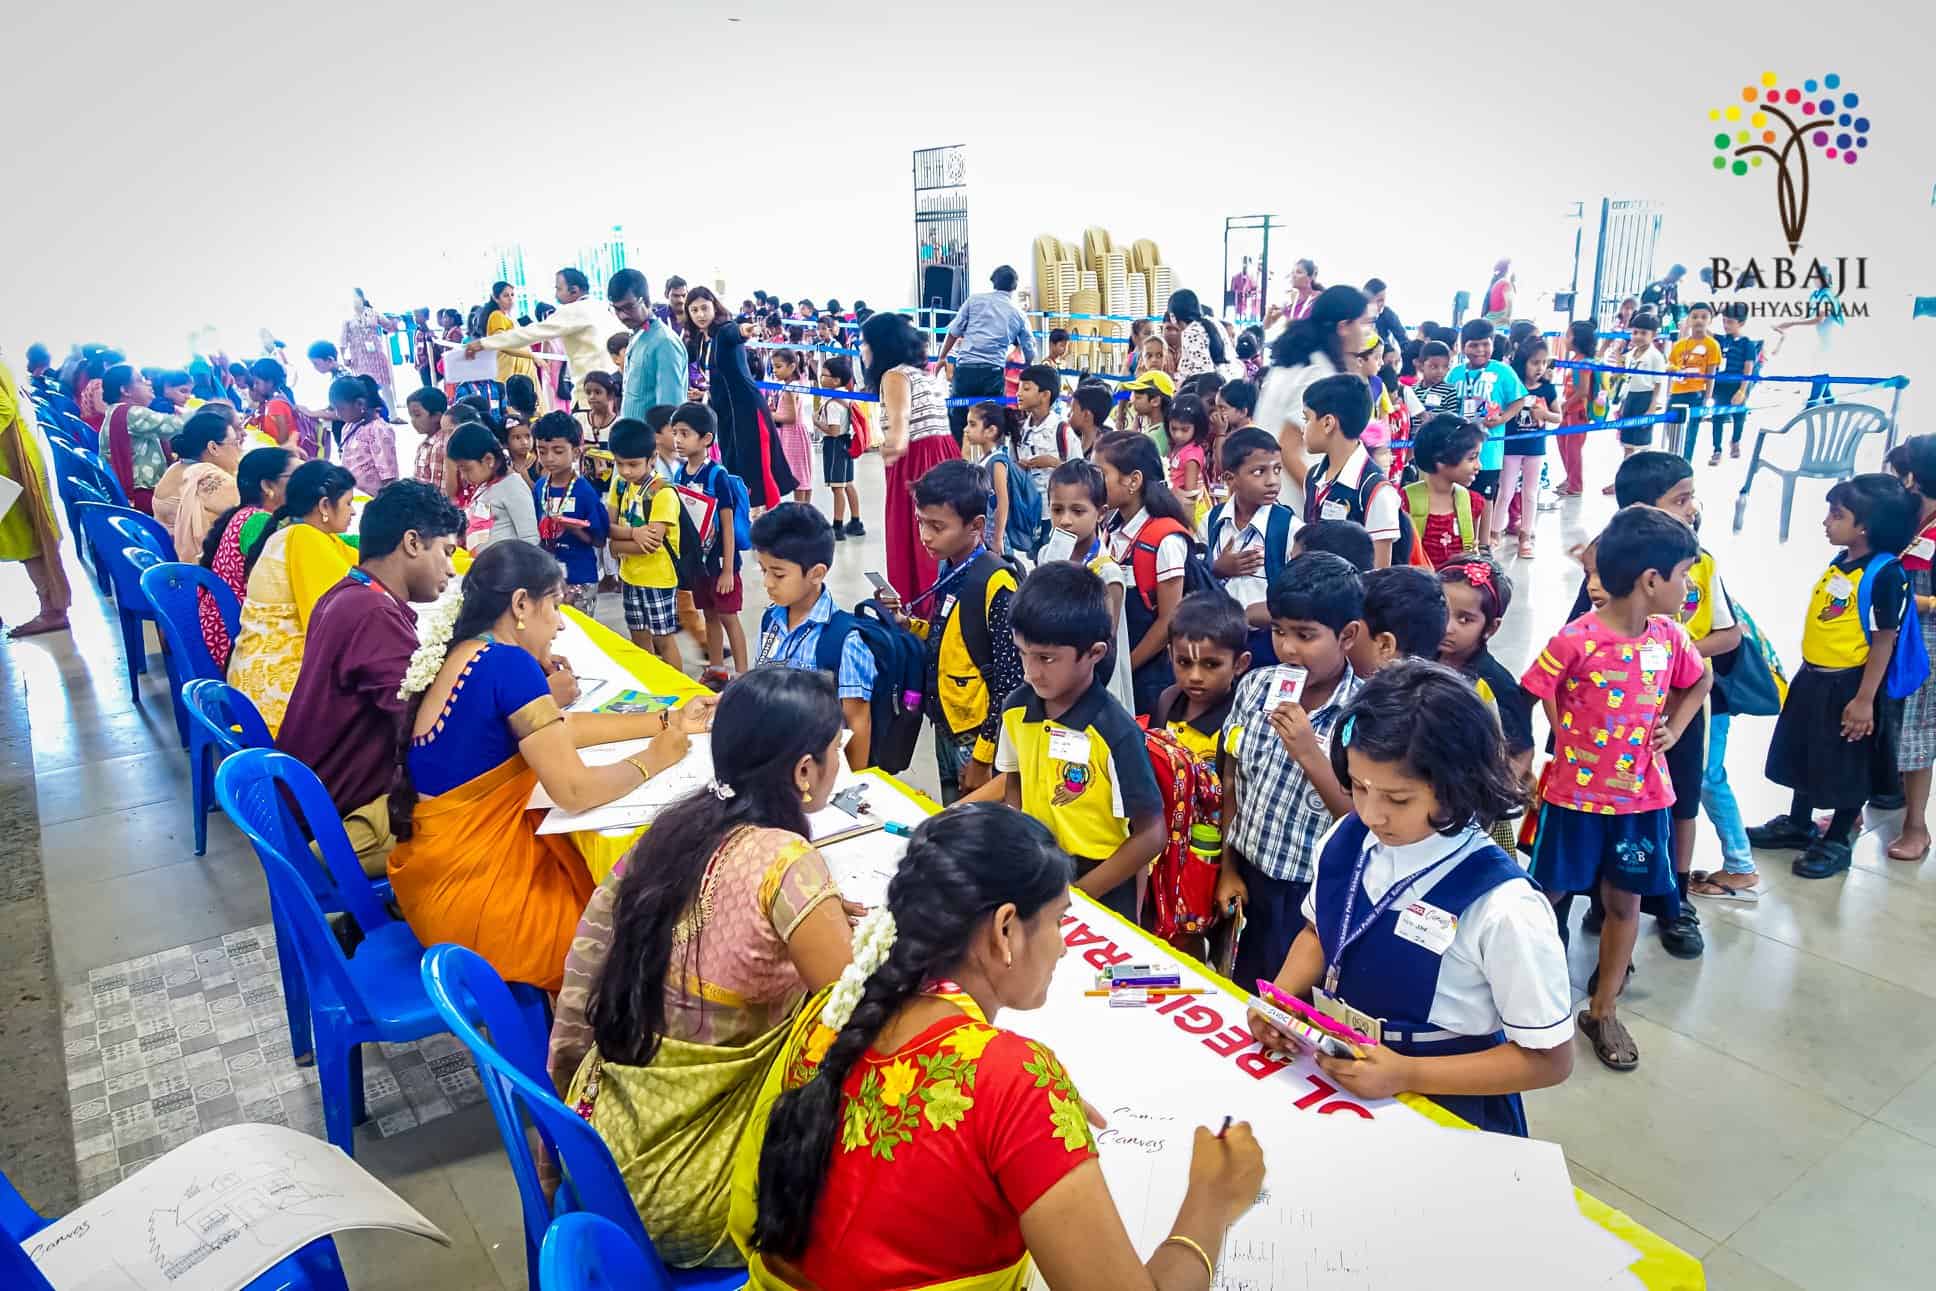 Small school kids with uniform are standing in queue and approaching teachers who are sitting in line on chairs with registration forms to enroll primary school students in cultural activities.